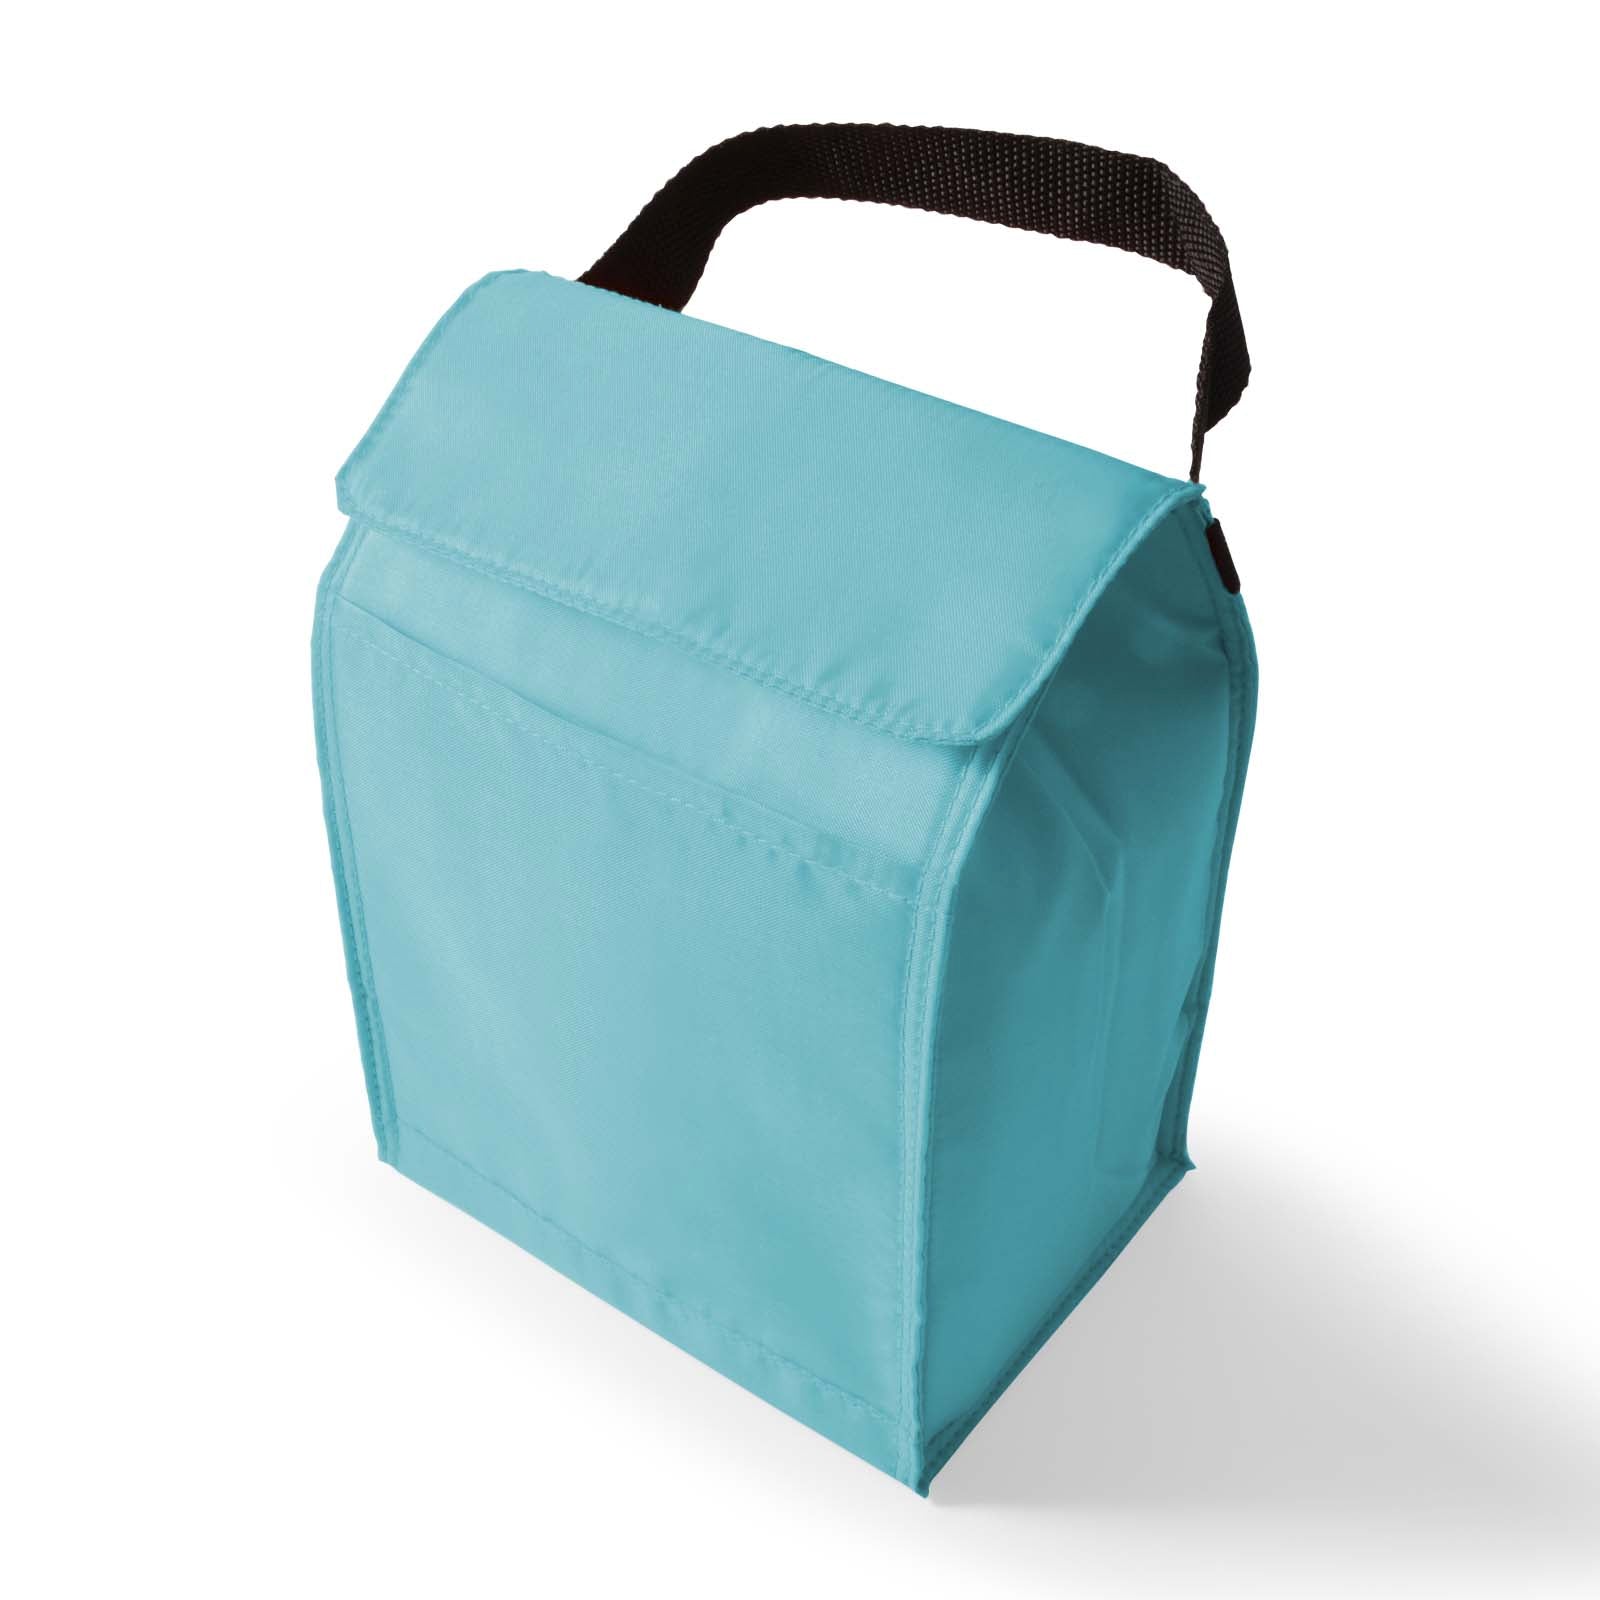 The Sumo Cooler Lunch Bag